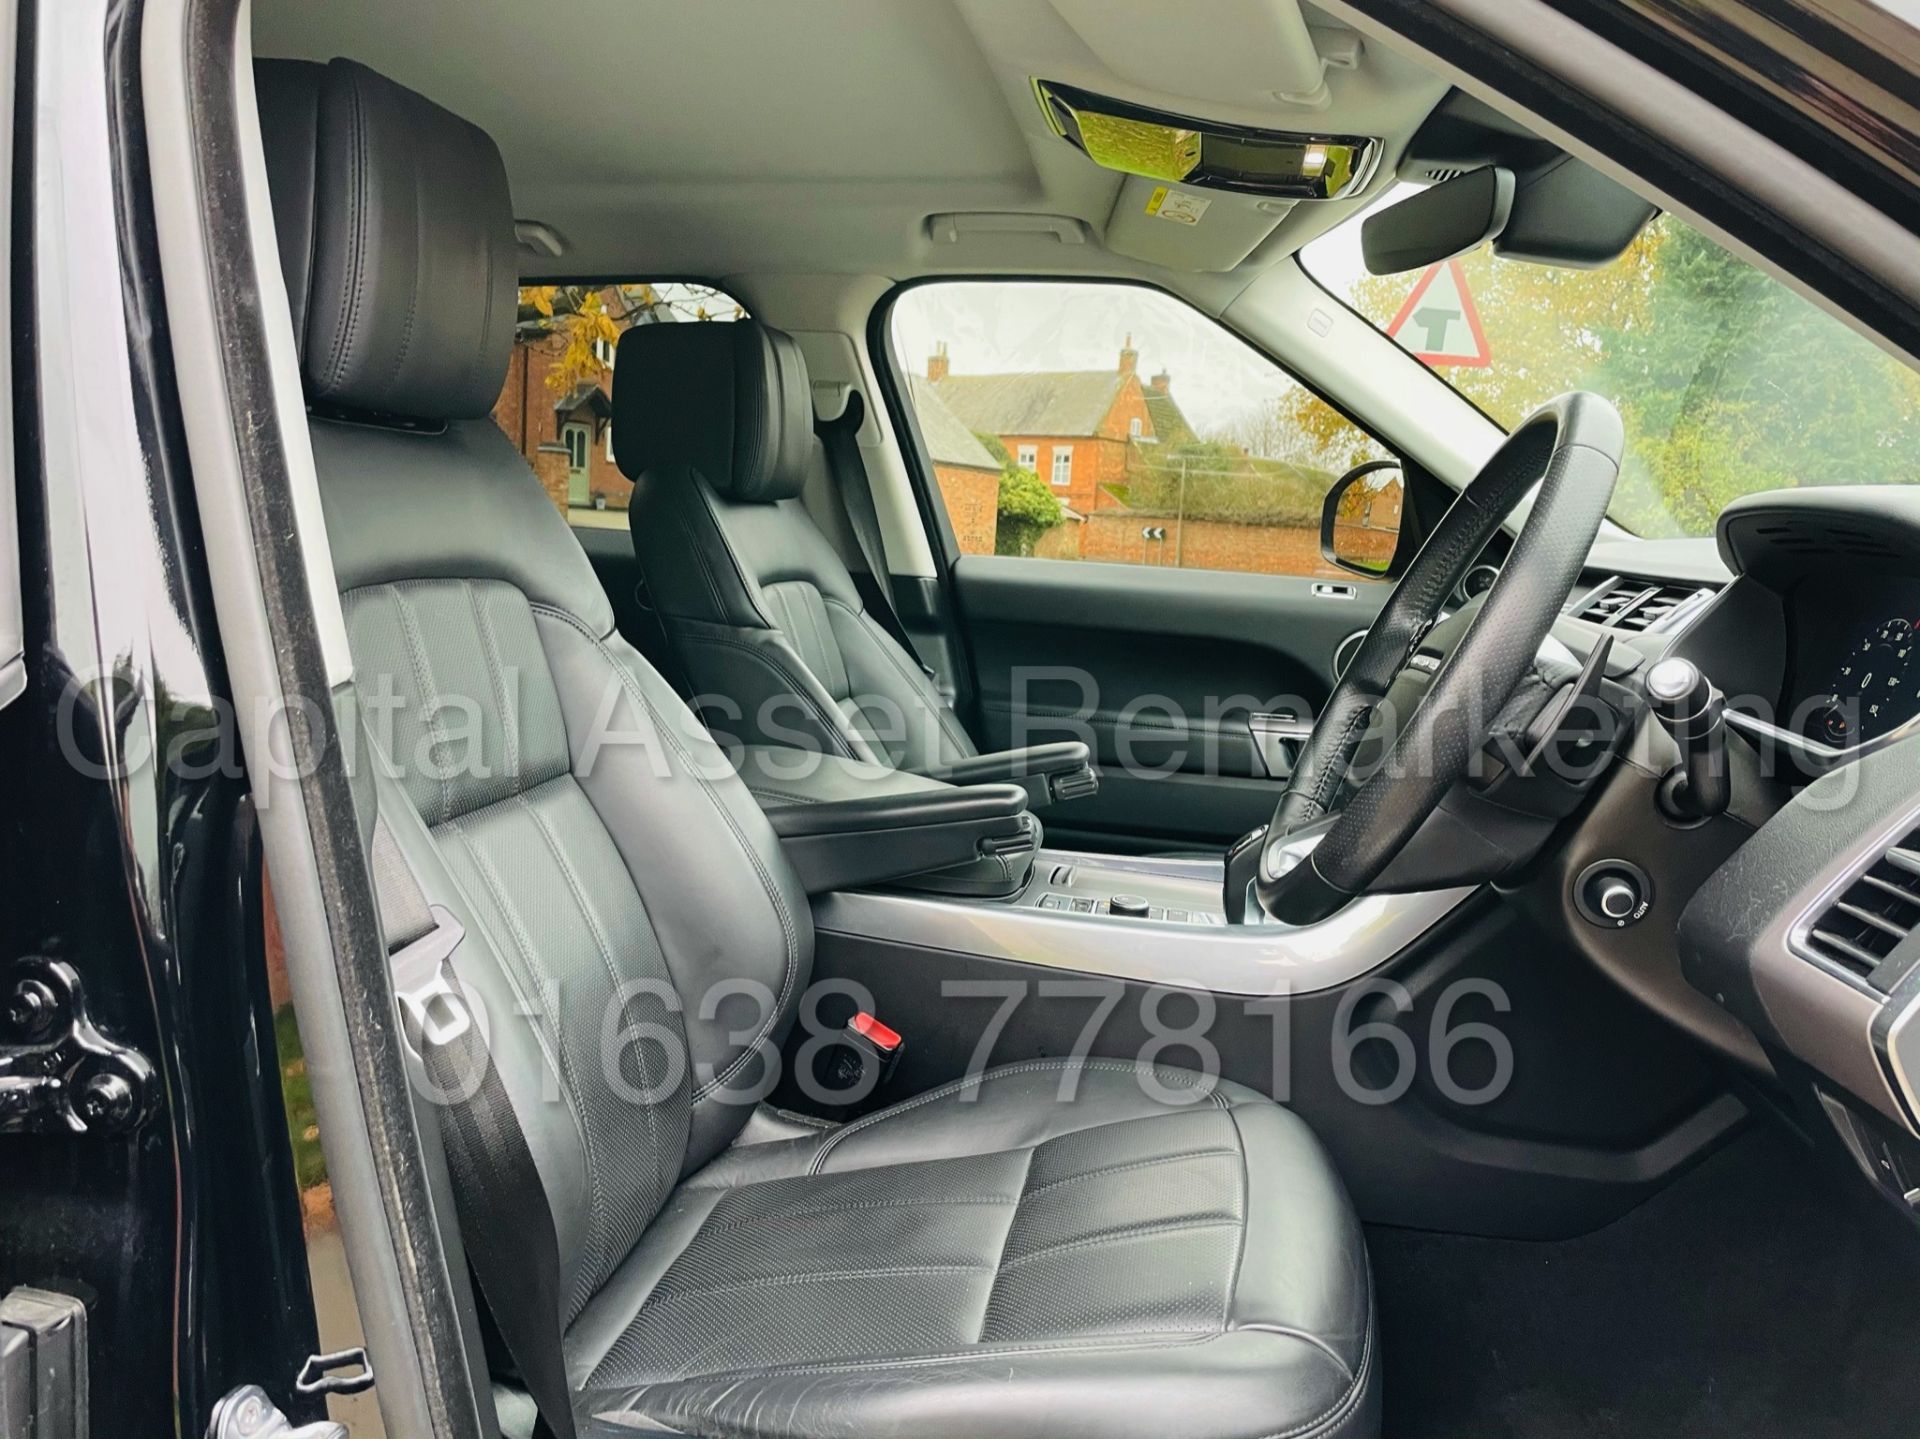 RANGE ROVER SPORT *HSE EDITION* SUV (2019 MODEL) '3.0 SDV6 - 306 BHP - 8 SPEED AUTO' *FULLY LOADED* - Image 41 of 56